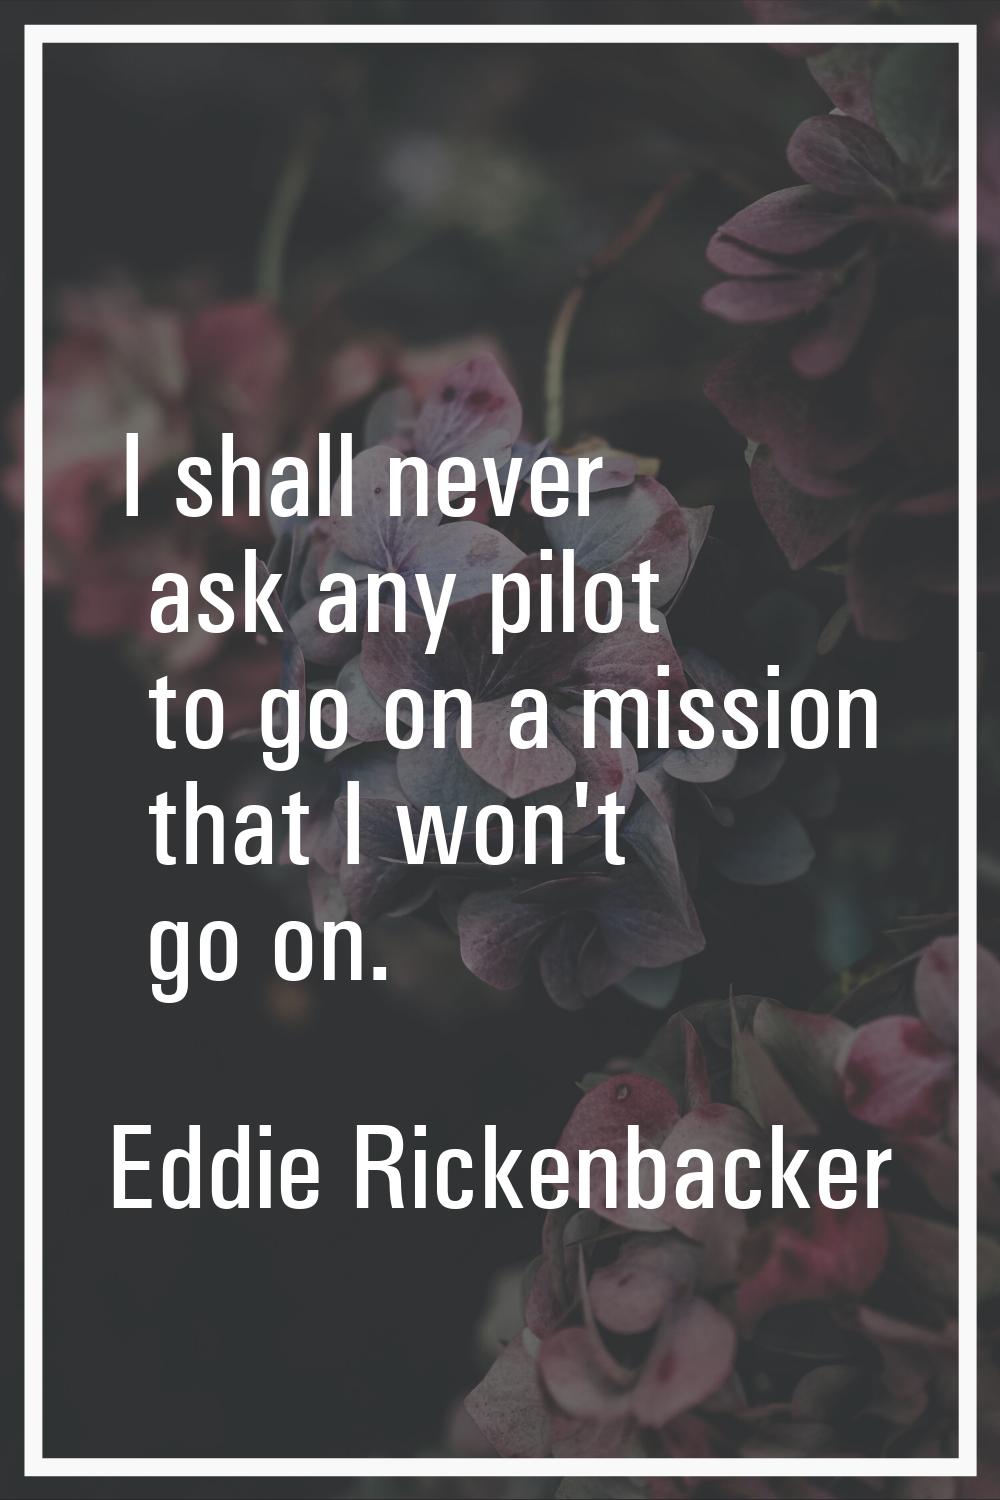 I shall never ask any pilot to go on a mission that I won't go on.